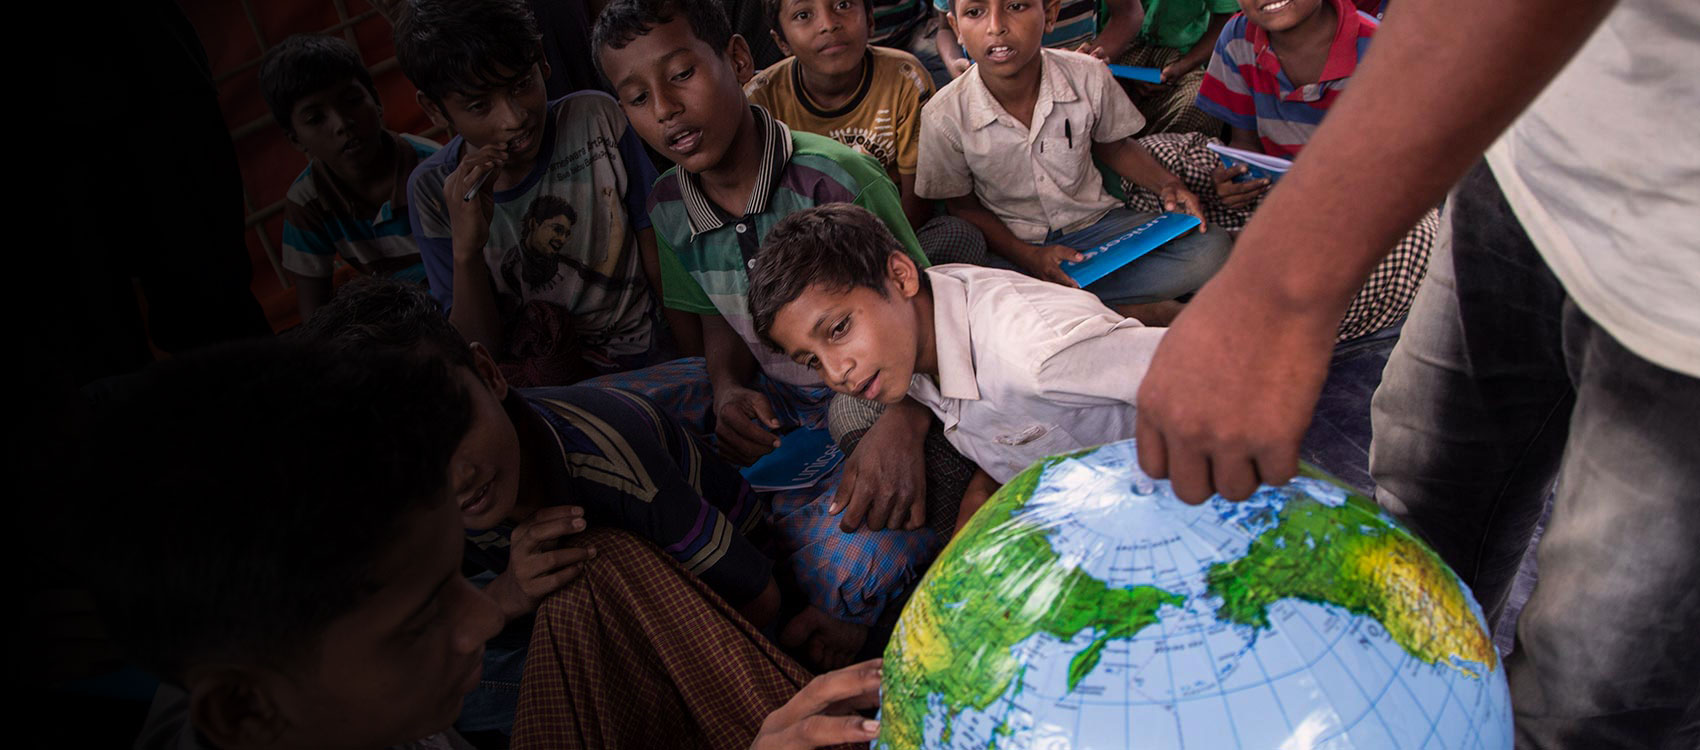 © UNICEF/UN0141027/LeMoyne/Bangladesh- Students look at an inflatable globe, part of the educational supplies contained in a School-in-a-Box, at a new Transitional Learning Centre in the Uchiprang refugee camp, near Cox's Bazar, Bangladesh